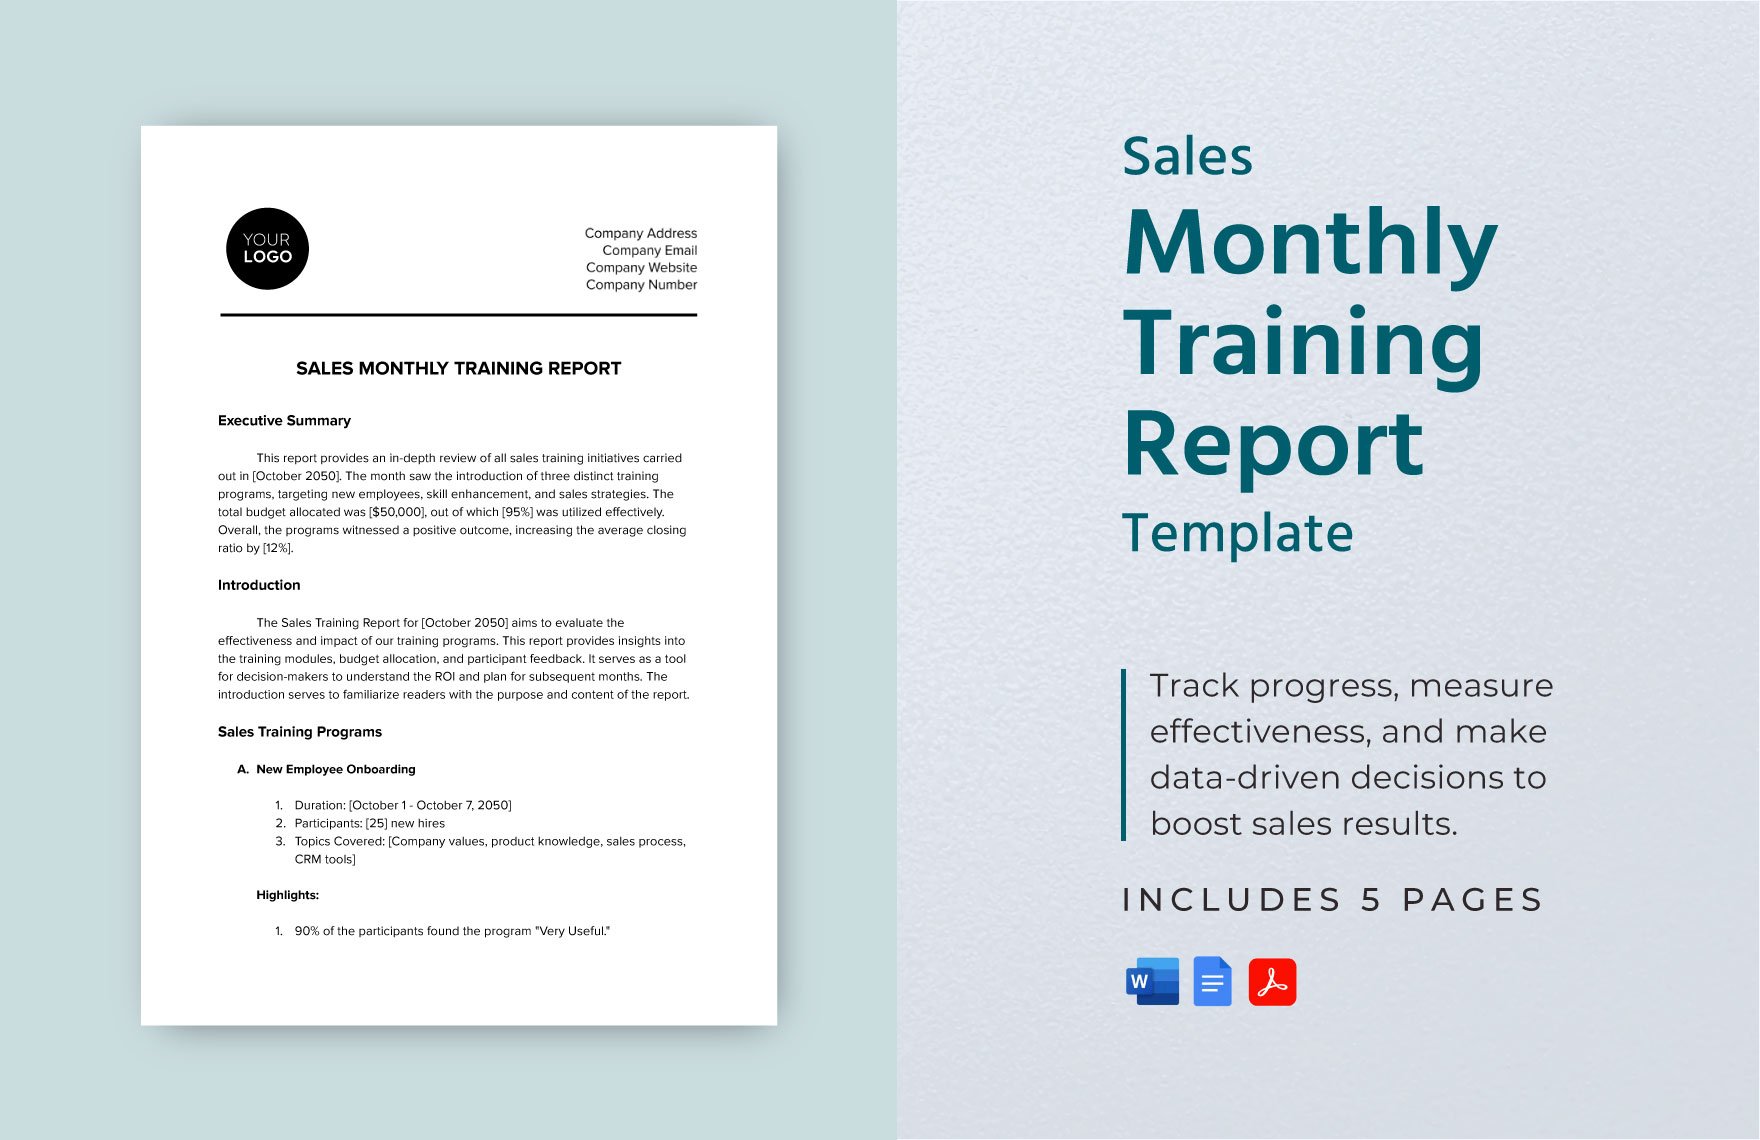 Sales Monthly Training Report Template